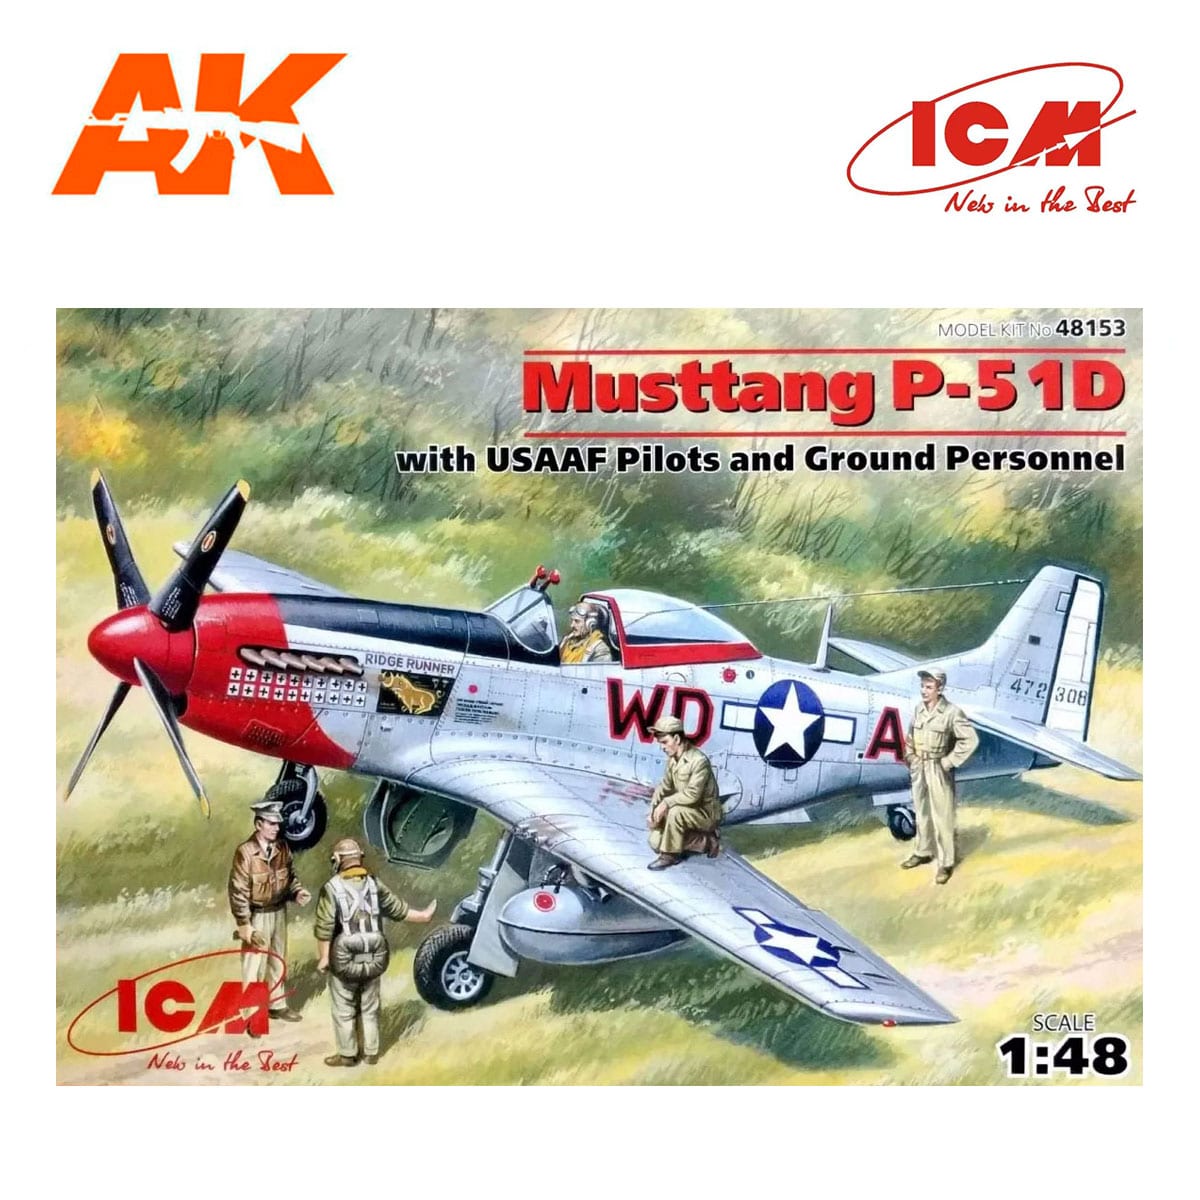 US Pilots and technics 1/48 toy model ICM 48153 Mustang P-51D USAF fighter 